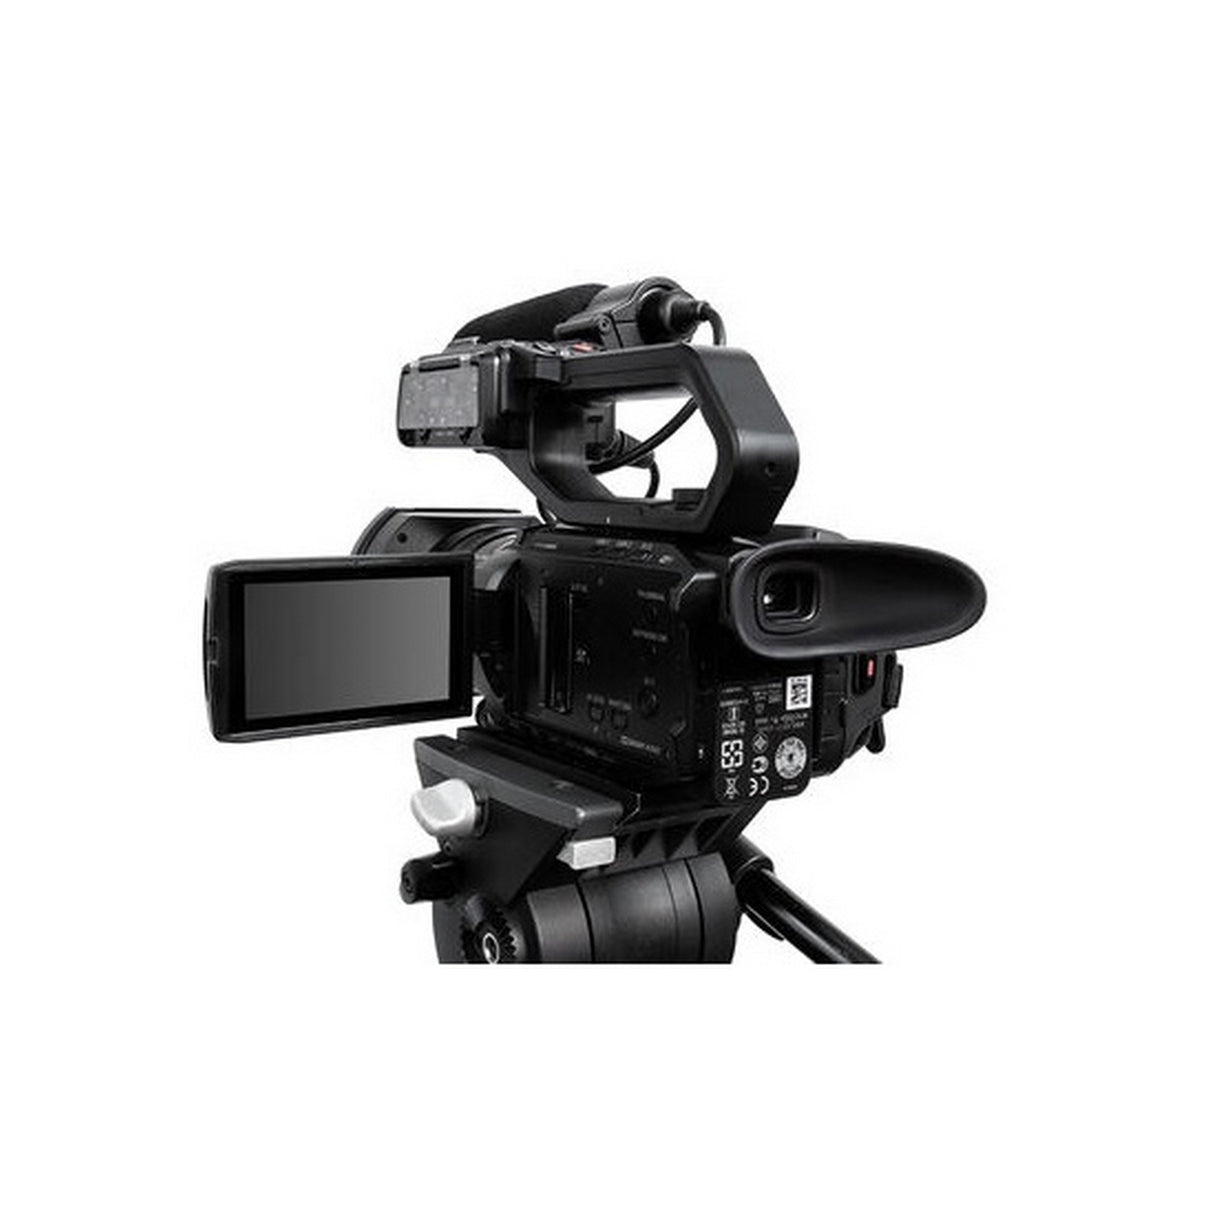 Panasonic 4K Professional Camcorder with 24X Optical Zoom and Live  Streaming - HC-X2000